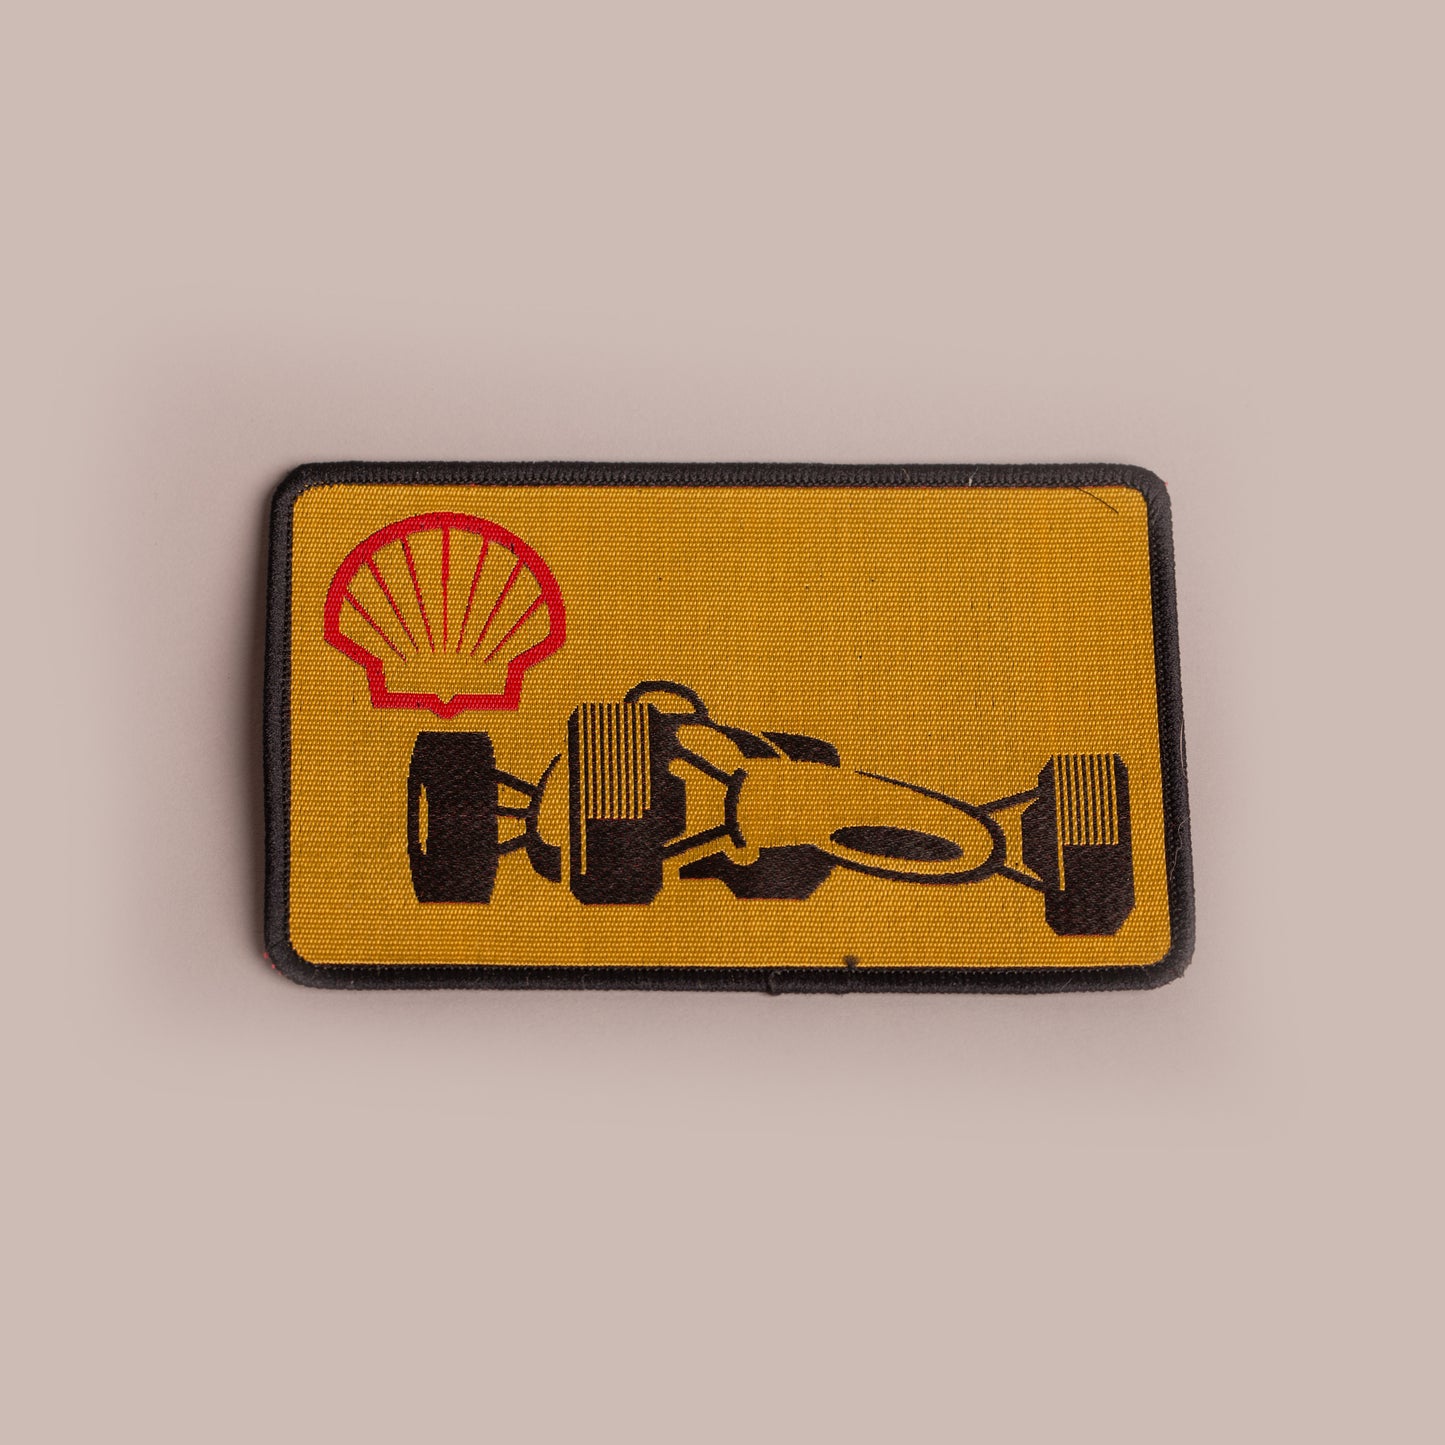 Vintage Patch - Shell Racing